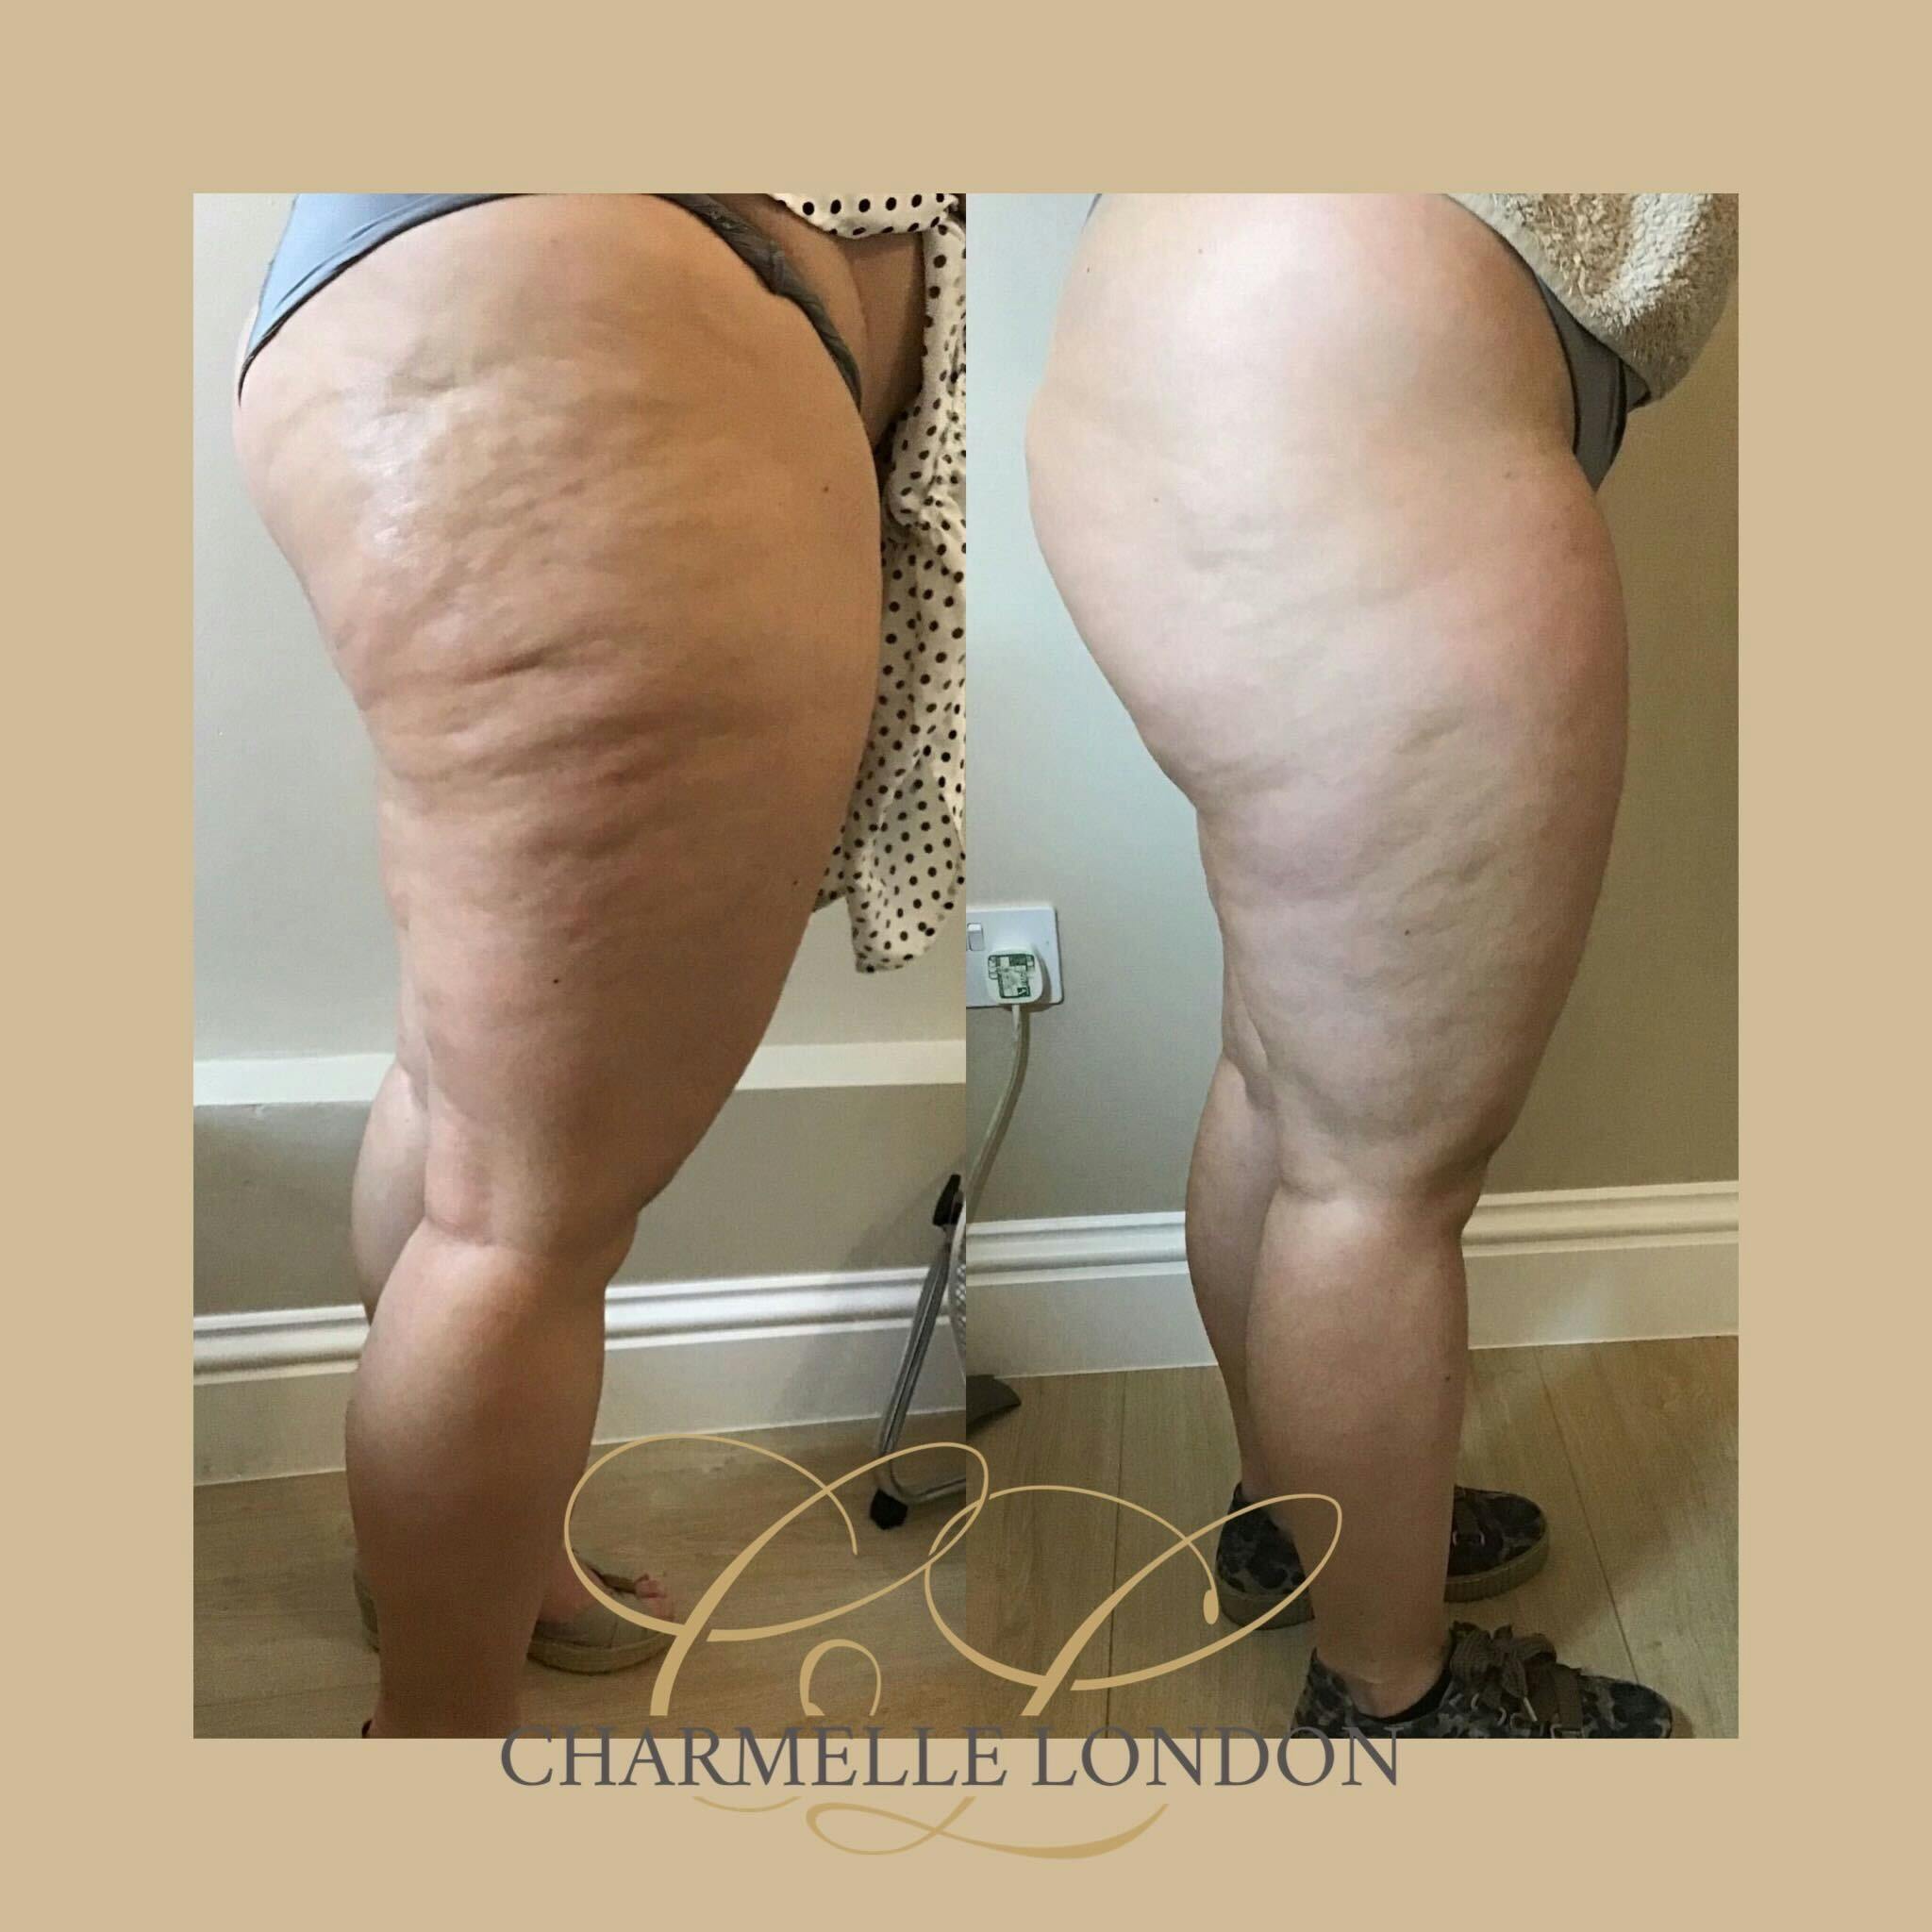 3D Bespoke Cellulite Removal A prescriptive treatment tailored to meet your needs using a combination of 3D Shockwave and 3D radiofrequency is used to reduce cellulite. Call 0333 016 3500.